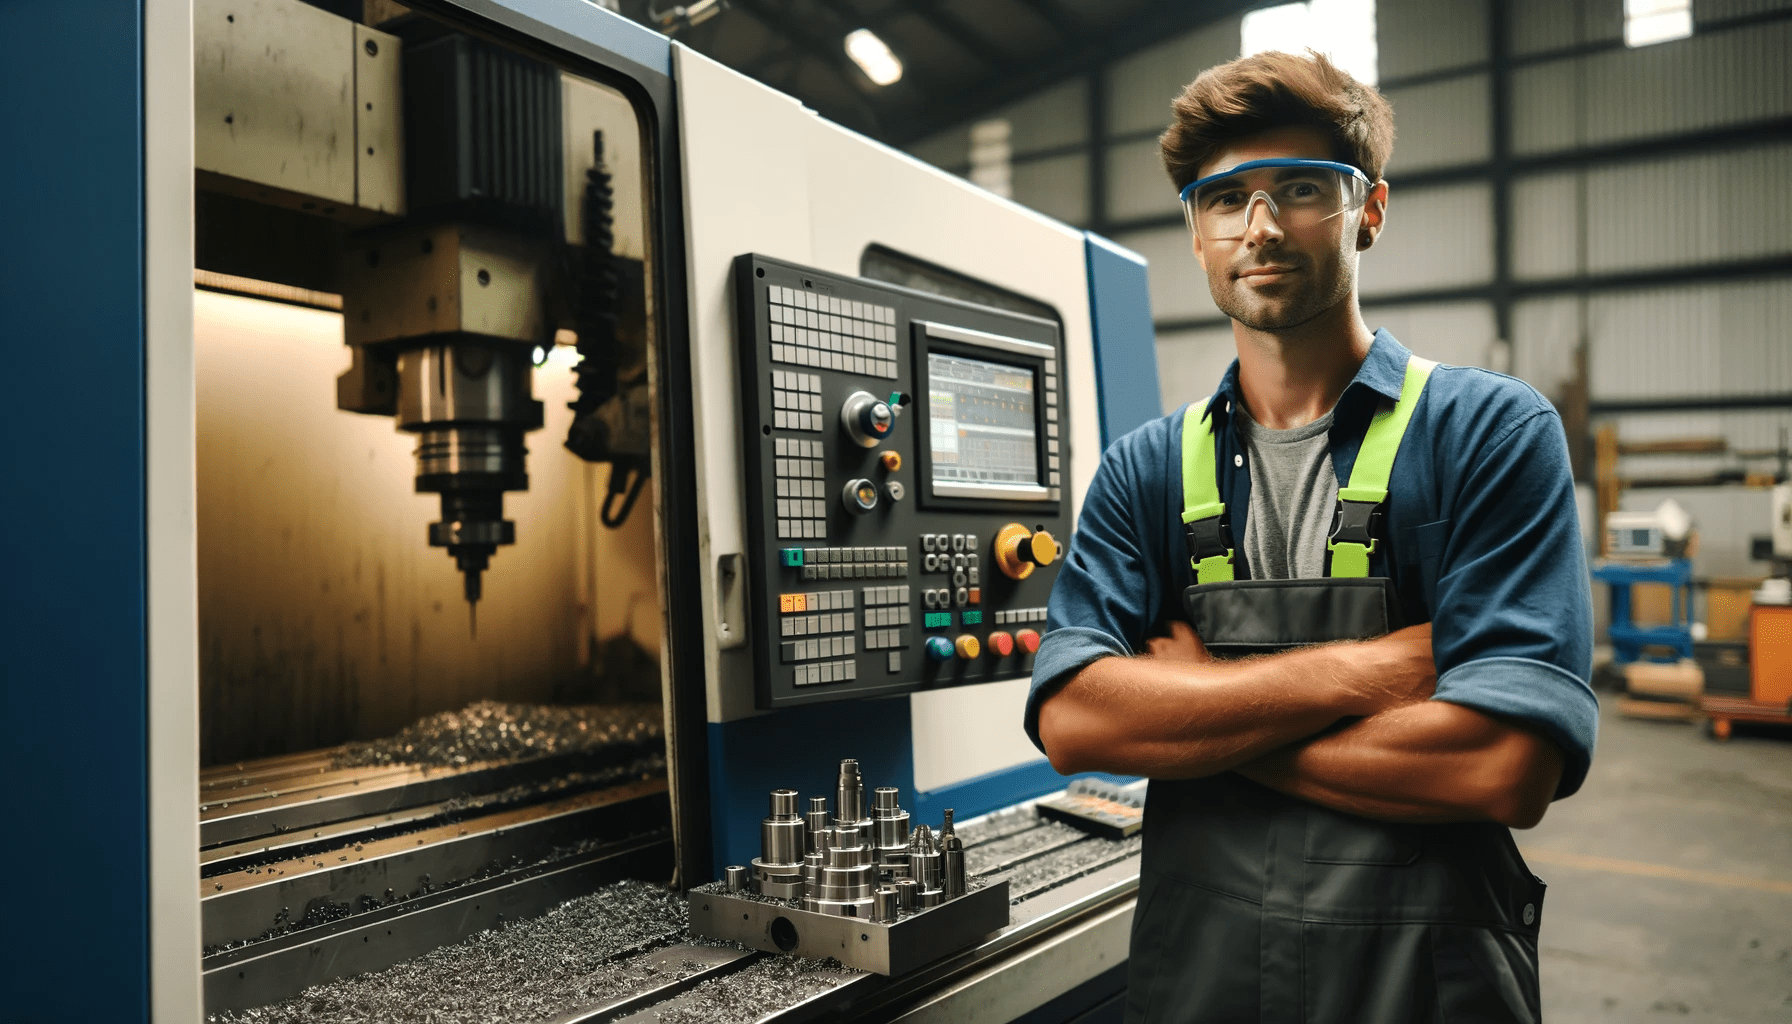 Caucasian male CNC machinist wearing safety goggles and a blue work shirt, standing in a CNC workshop. The environment is industrial, with